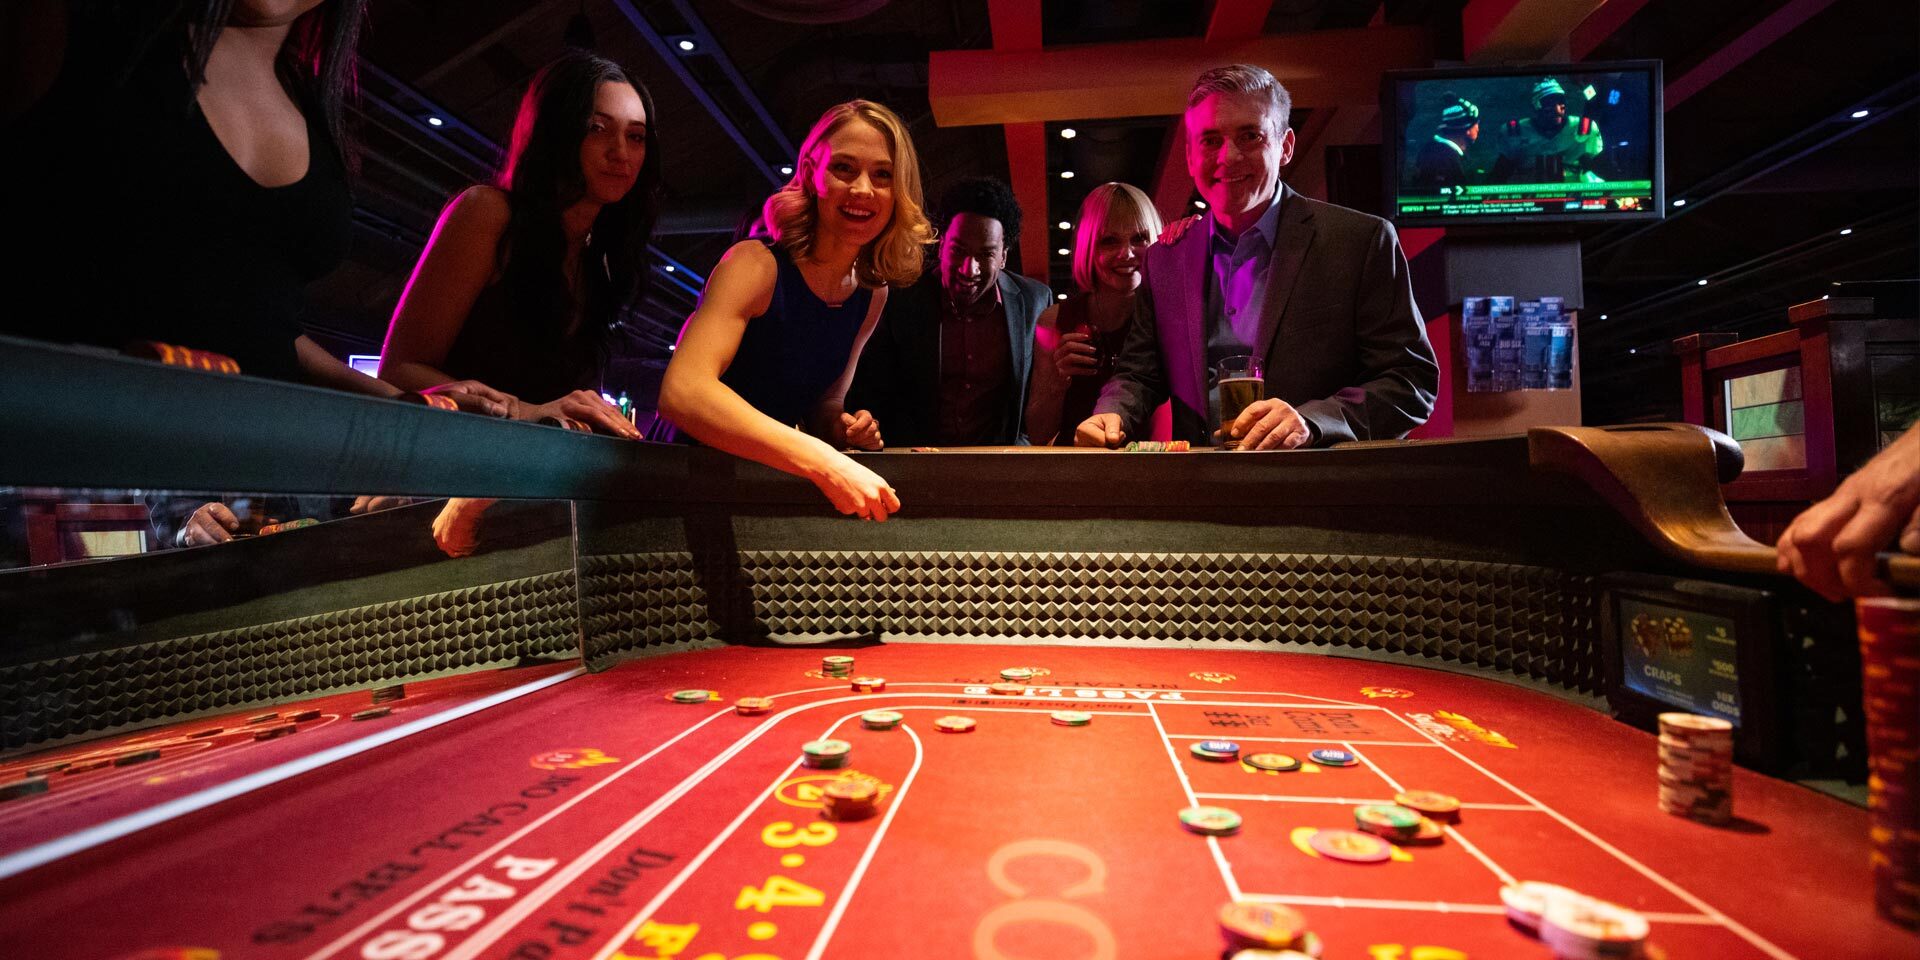 People enjoying a game at the casino.